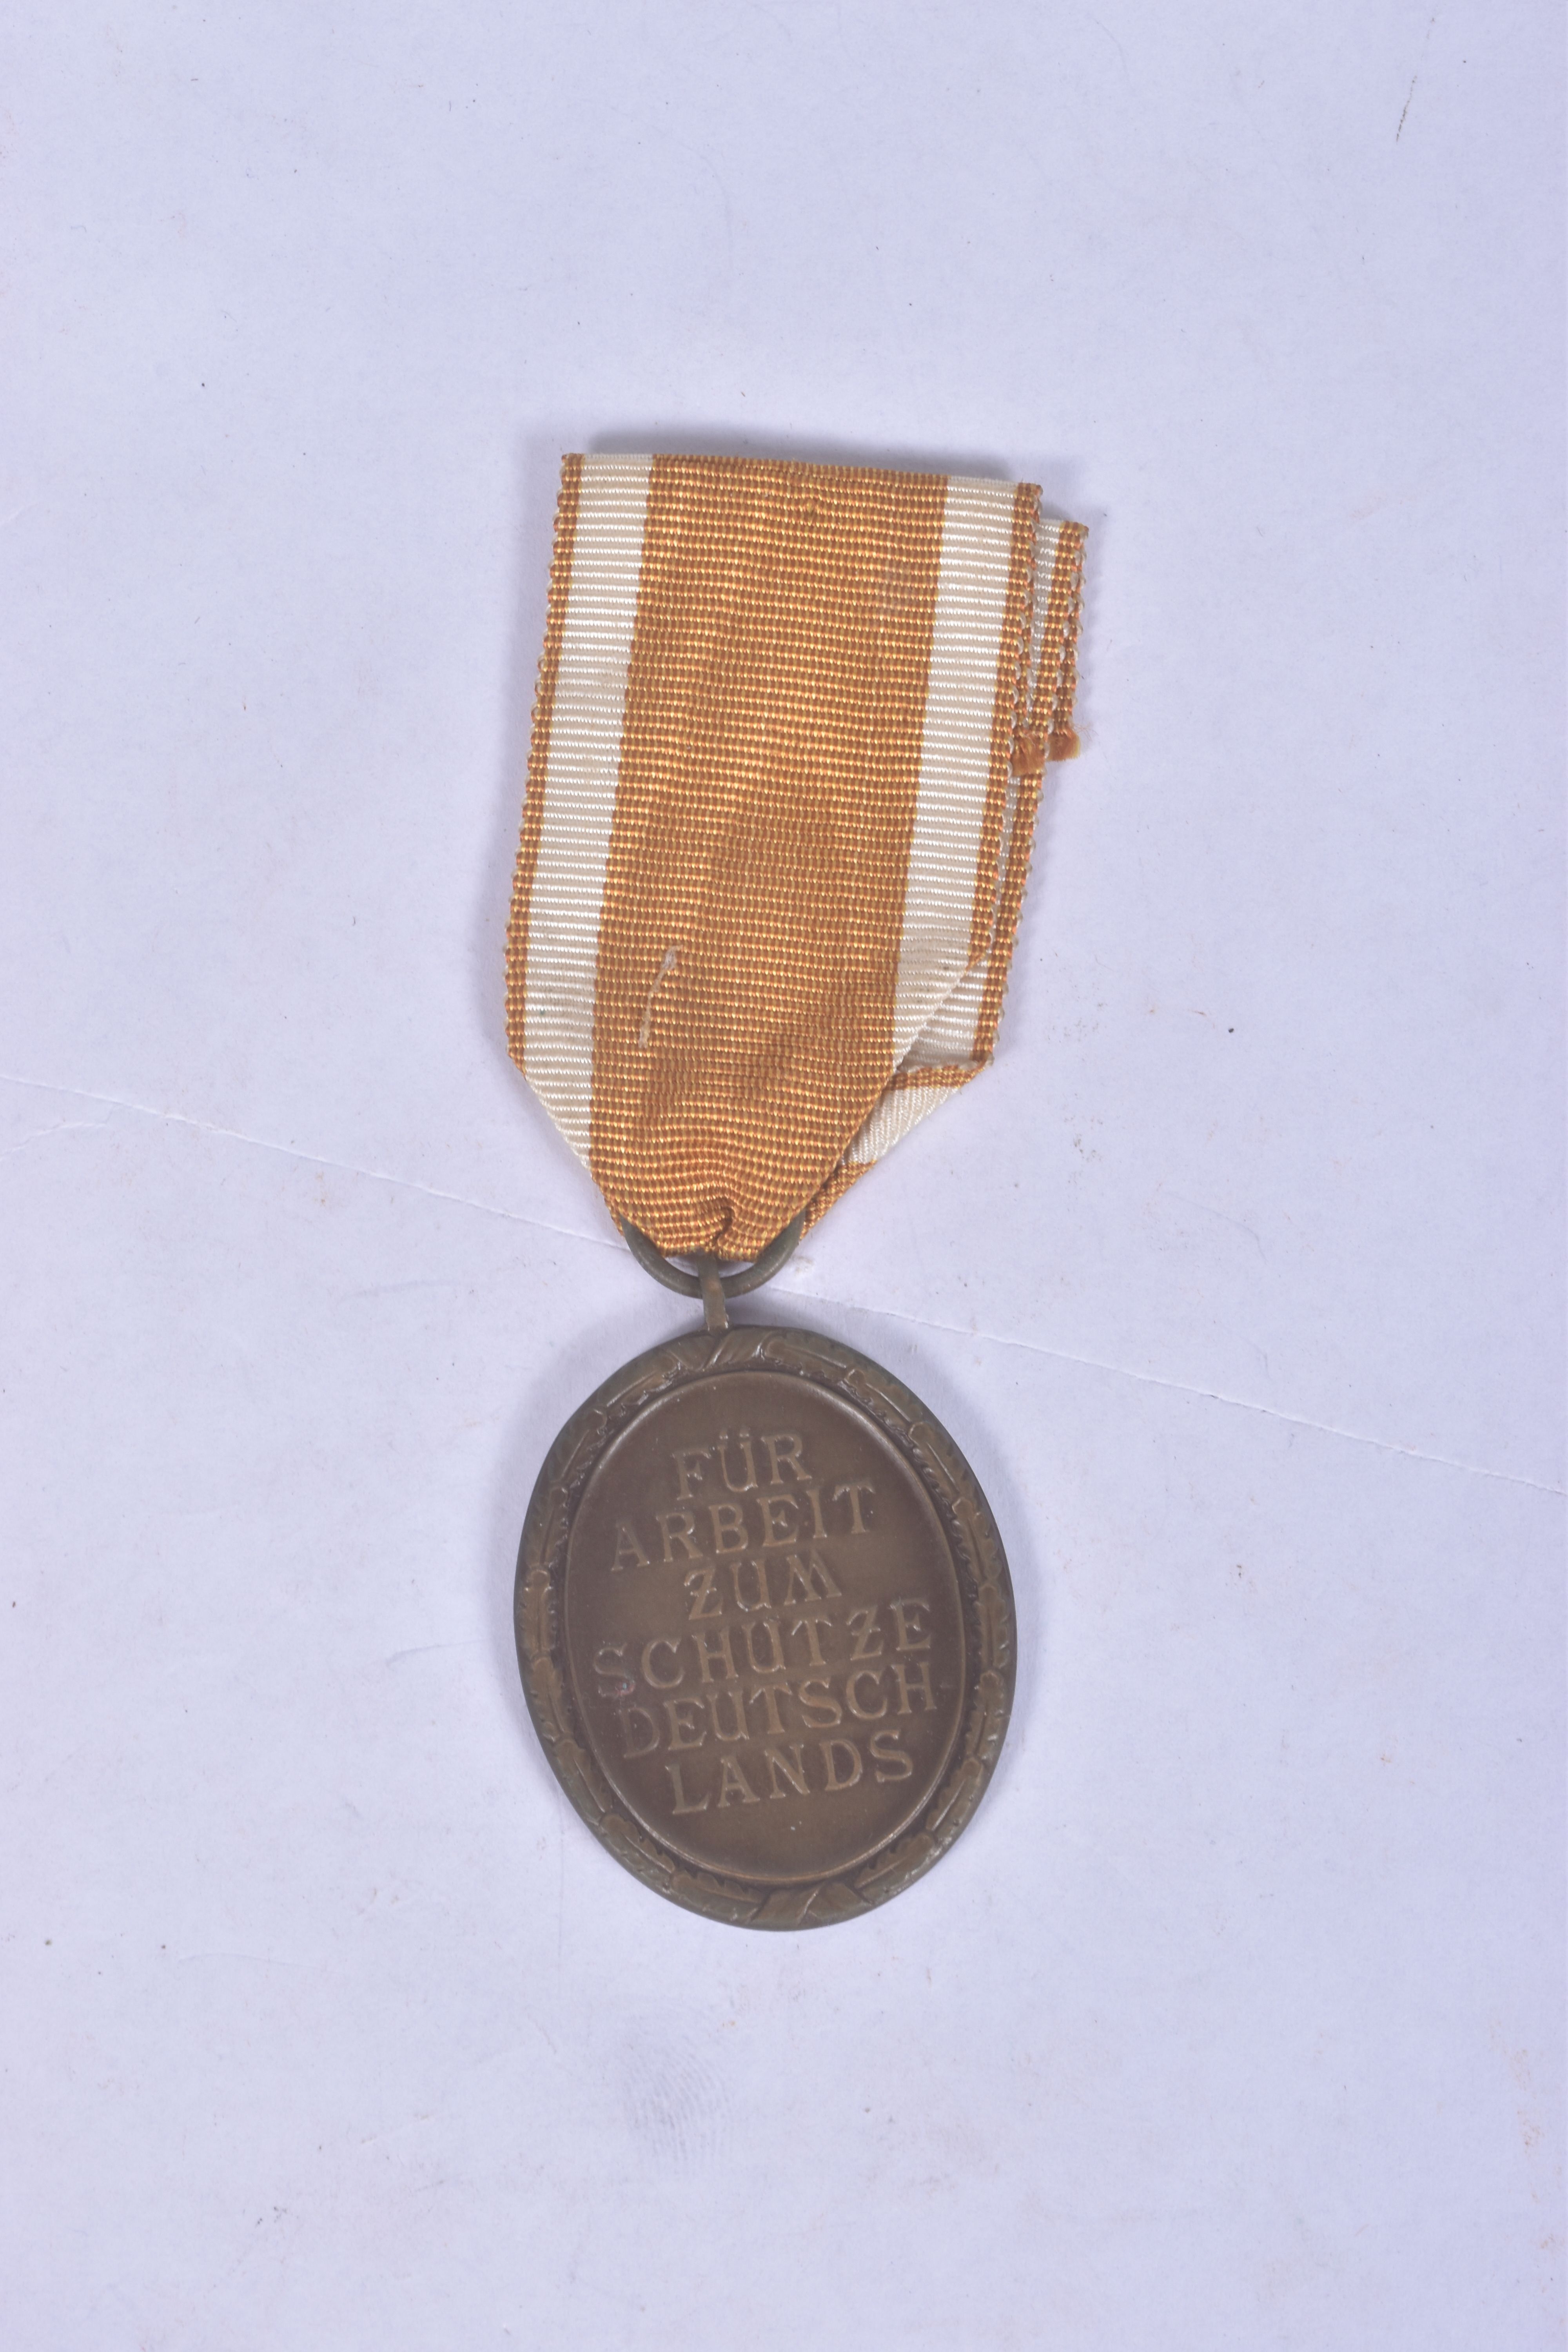 A WW1 HAMBURG CROSS AND A WW2 WEST WALL MEDAL, BOTH MEDALS COME WITH a correct ribbon and are in - Image 5 of 5